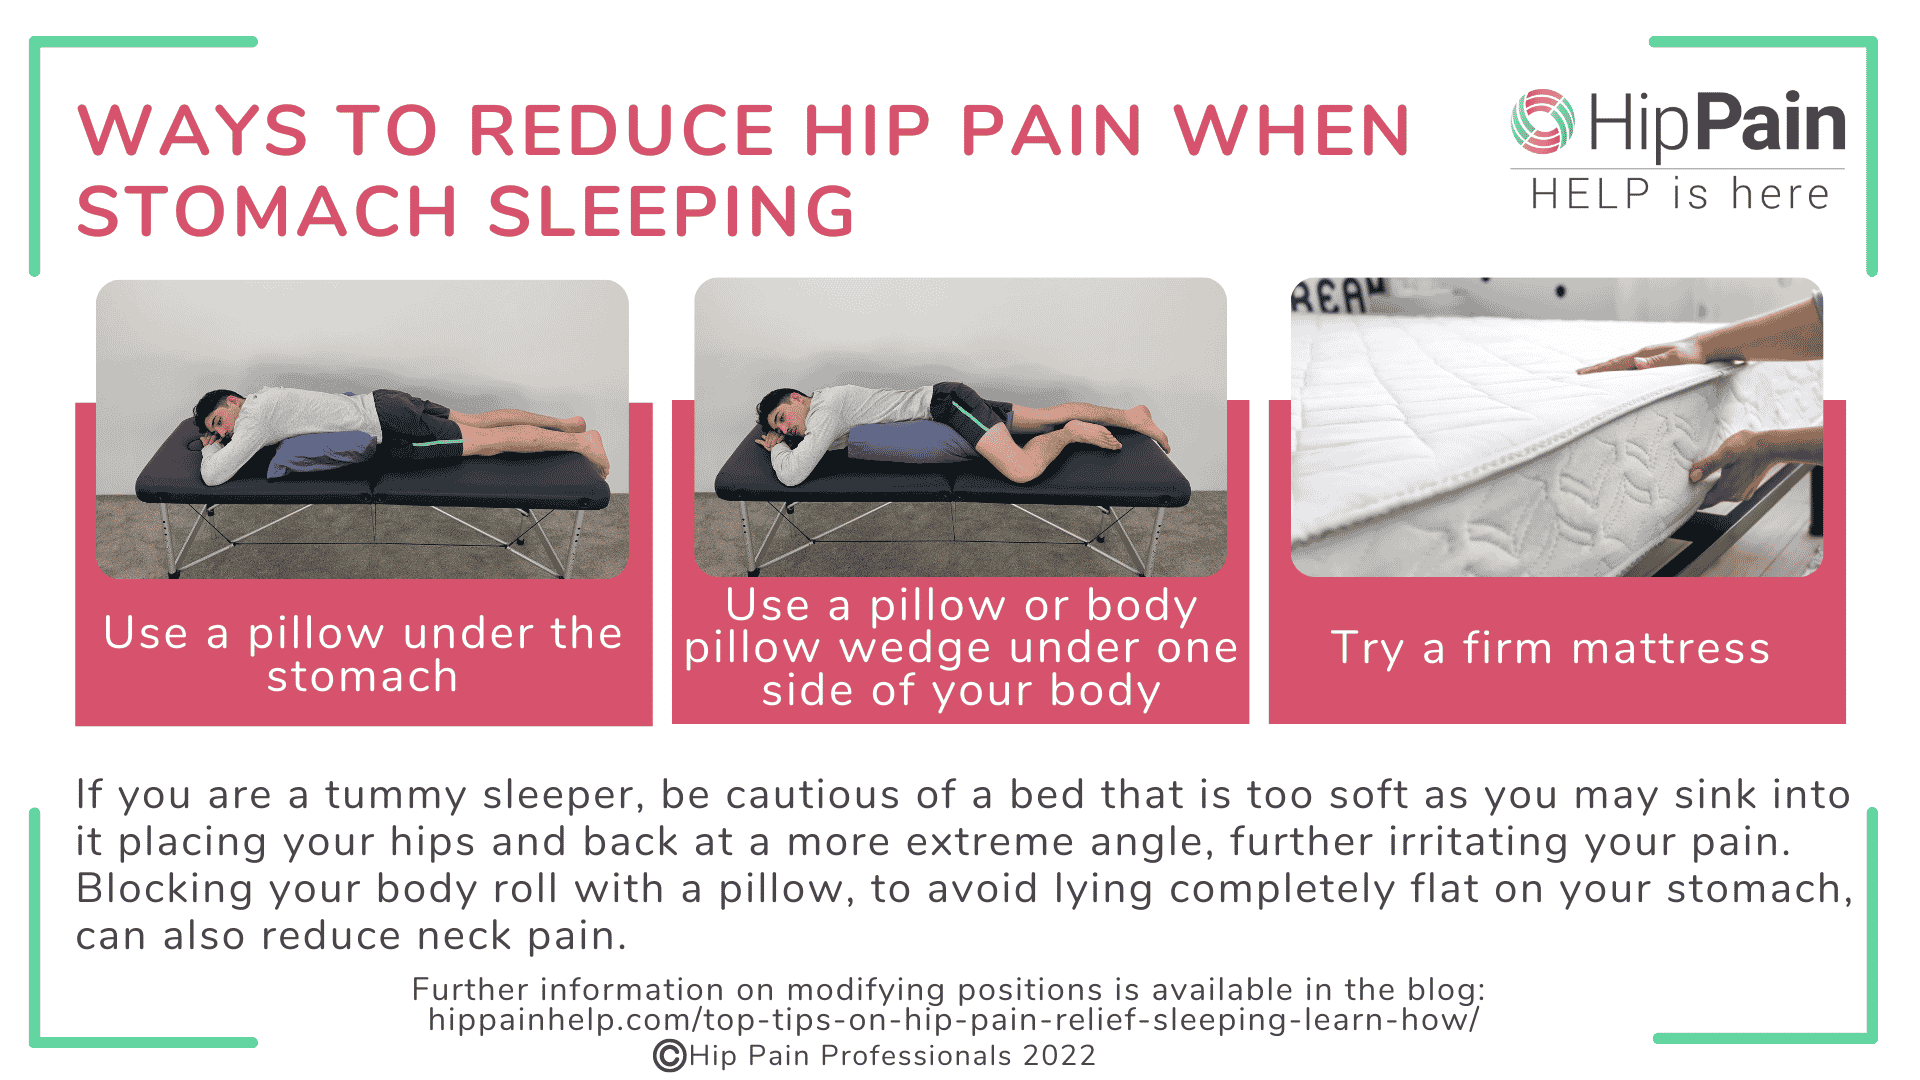 Hip Pain Help - For those with pregnancy-related pelvic pain at night,  often the worst sleeping positions are: • sleeping flat on the back, or •  side sleeping with no support. You